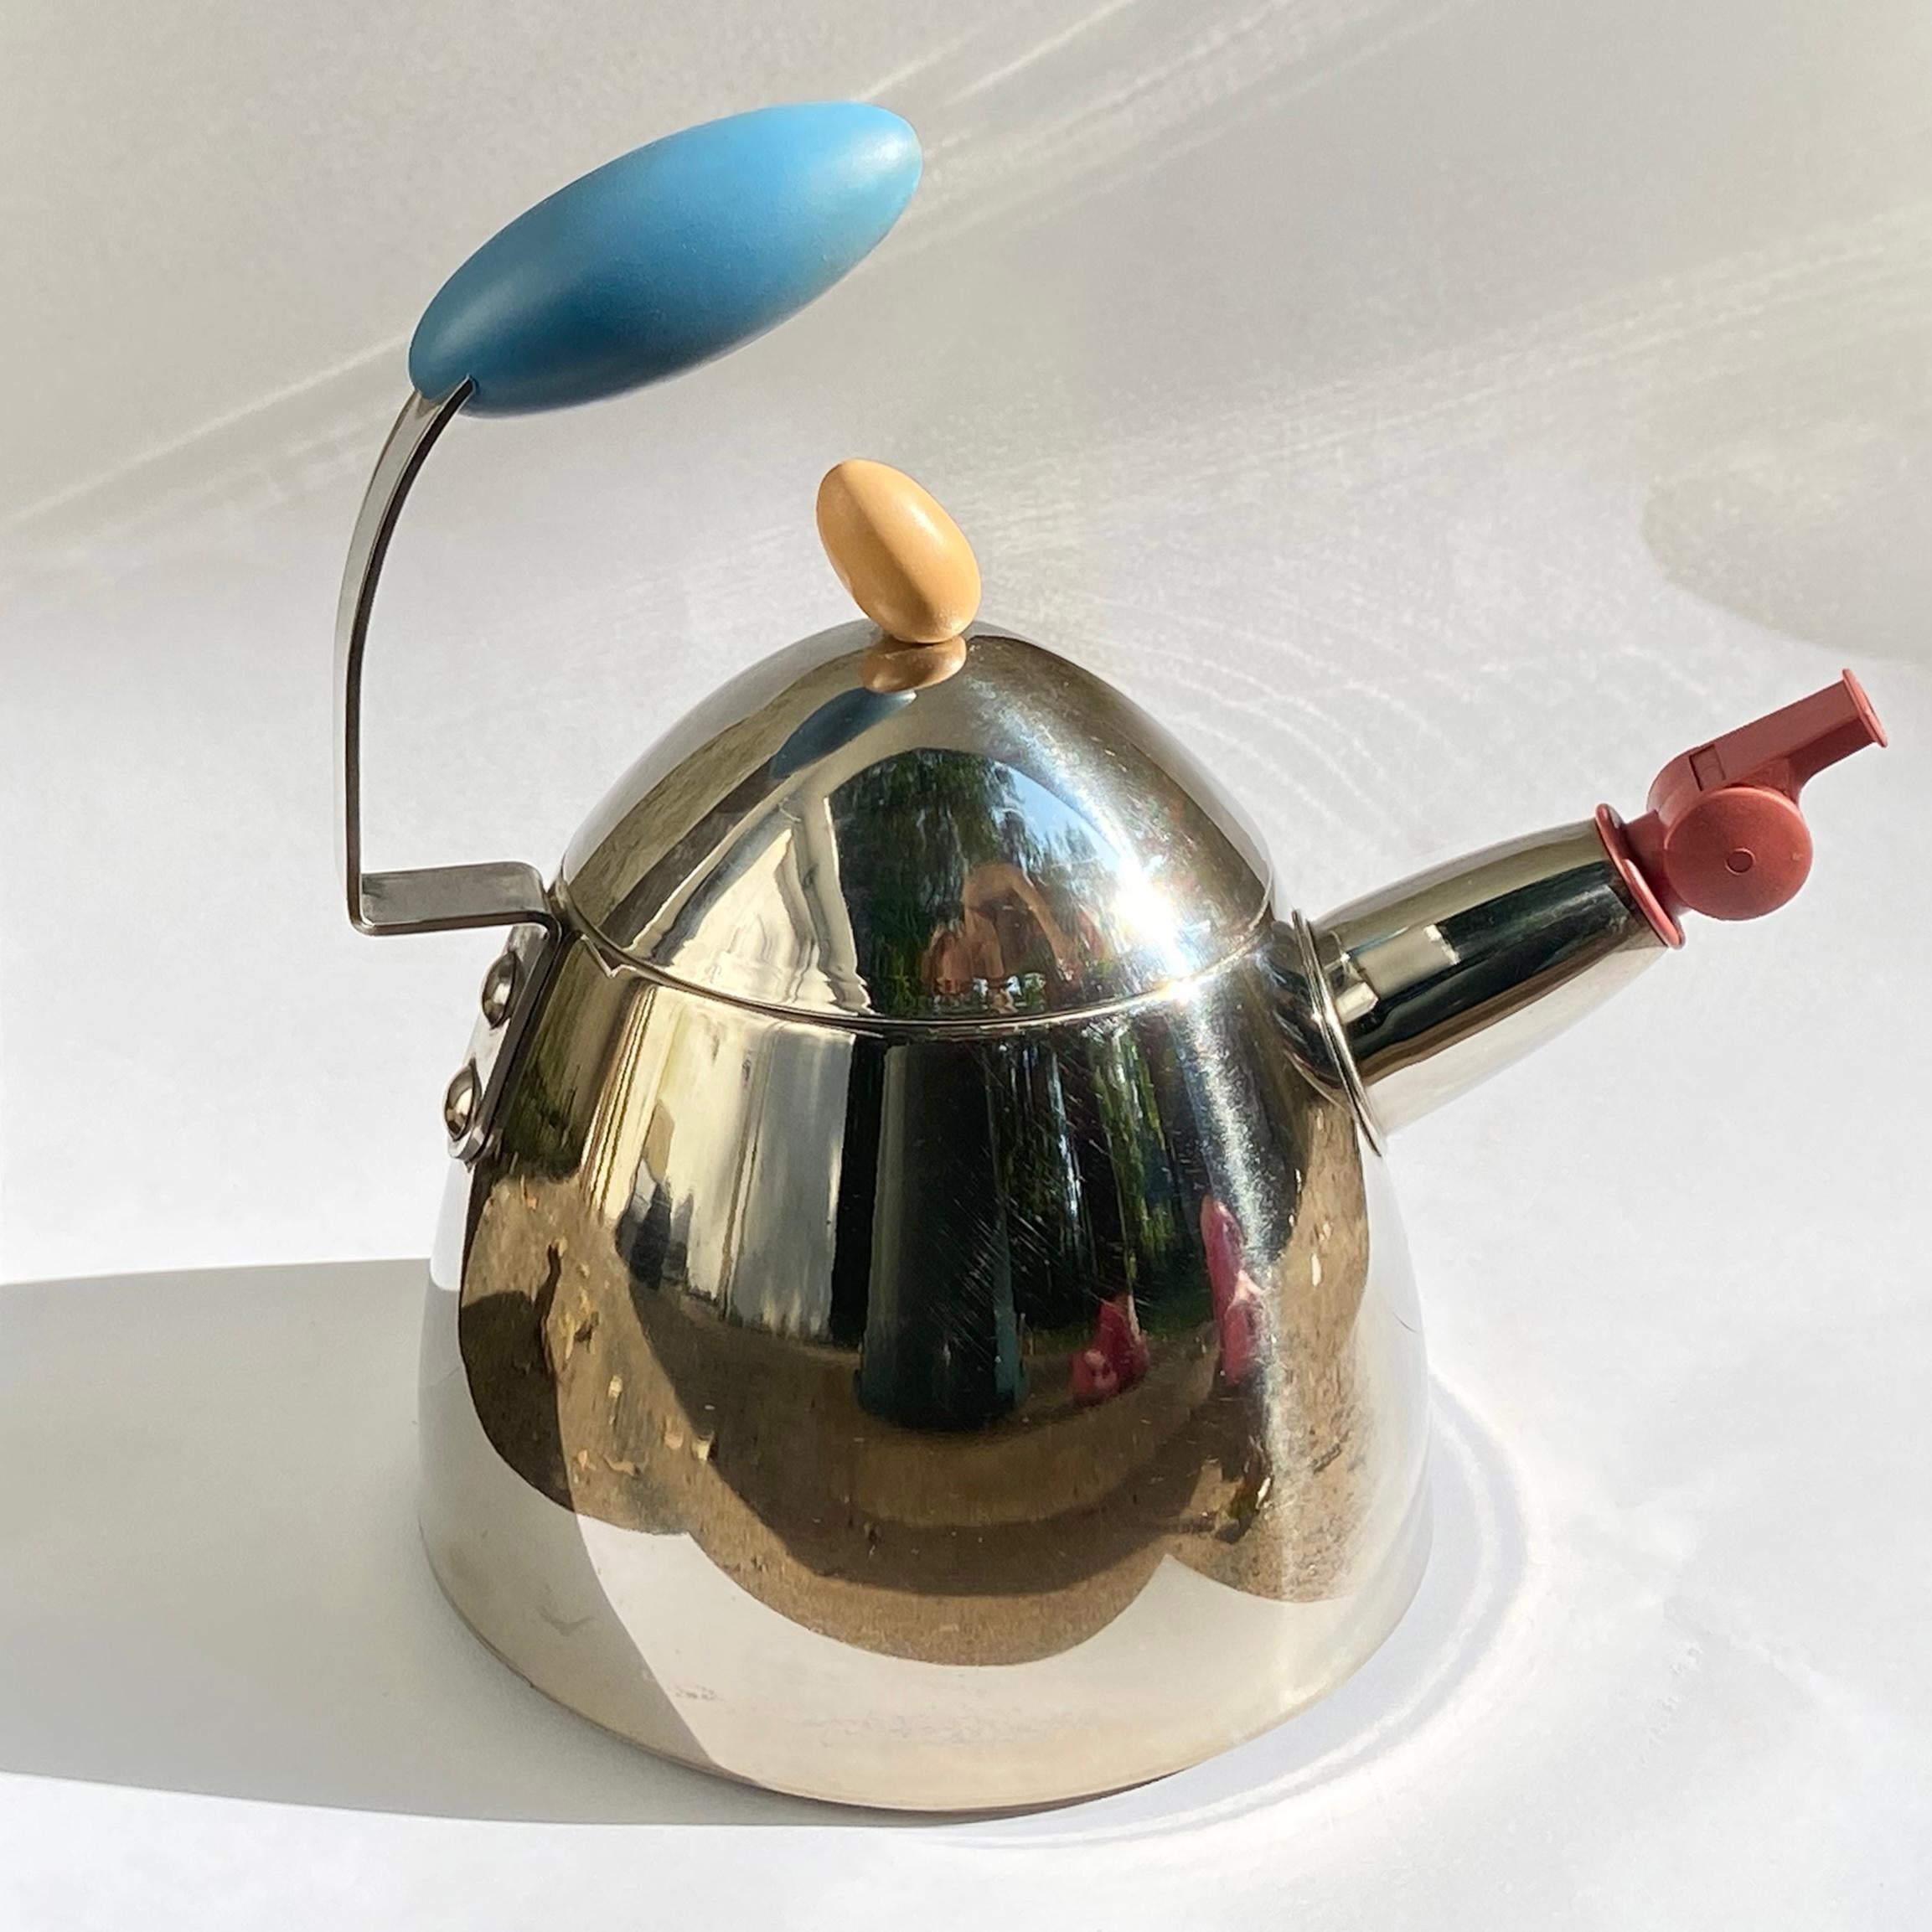 1998-99 Michael Graves whistling kettle designed for Target.

This item is in good vintage condition and shows normal signs of wear expected with age.